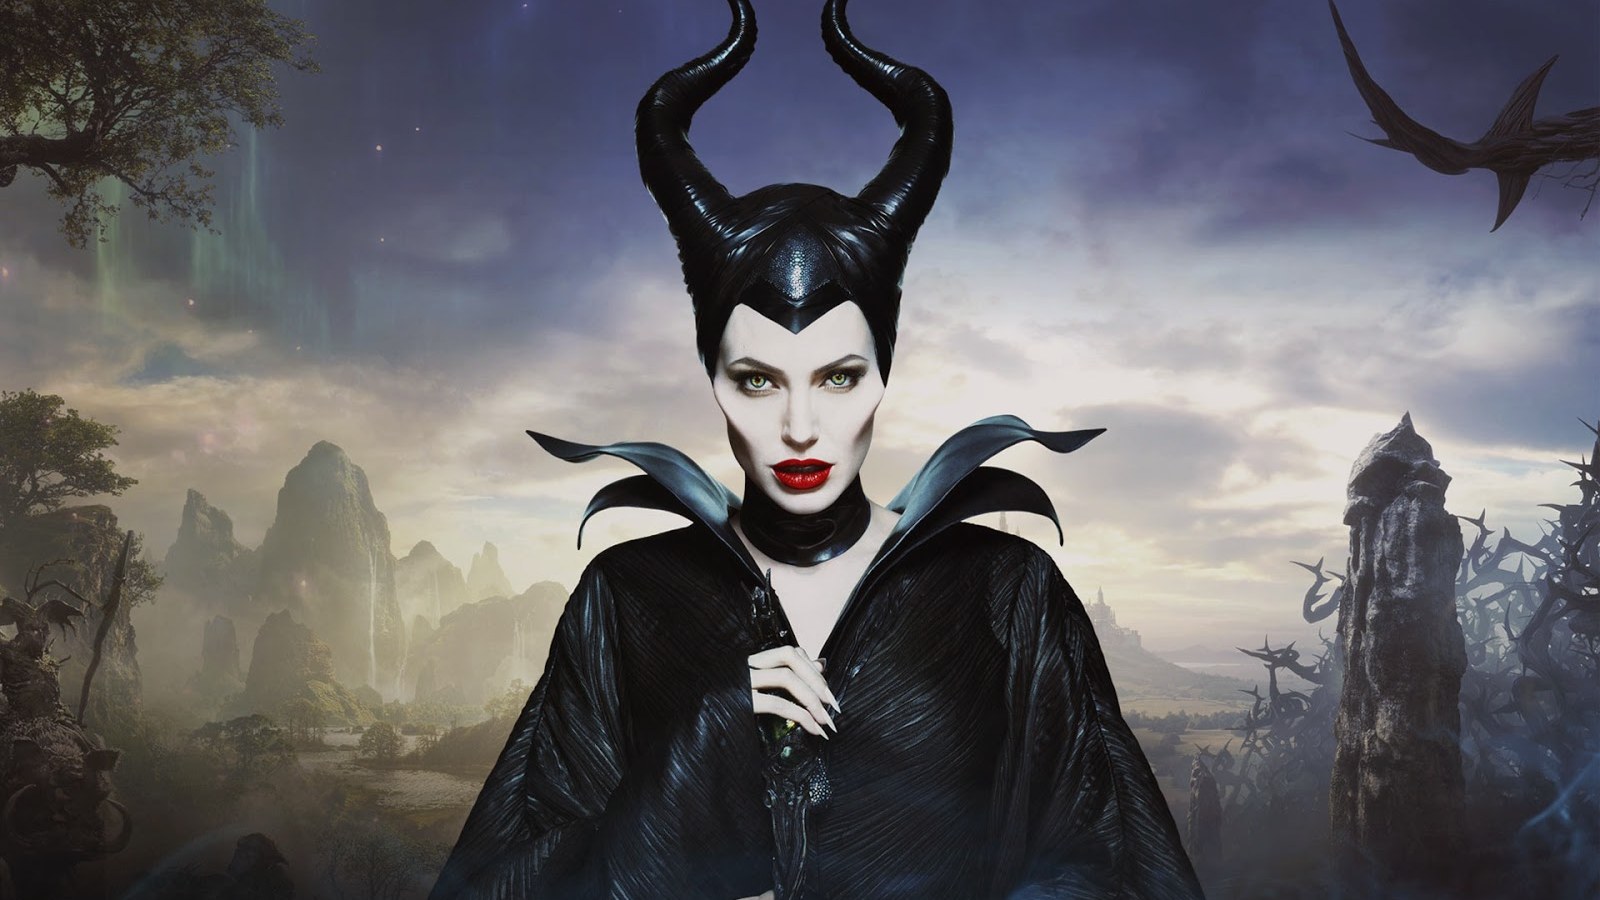 Maleficent' Recap: What Happened in the First Movie?